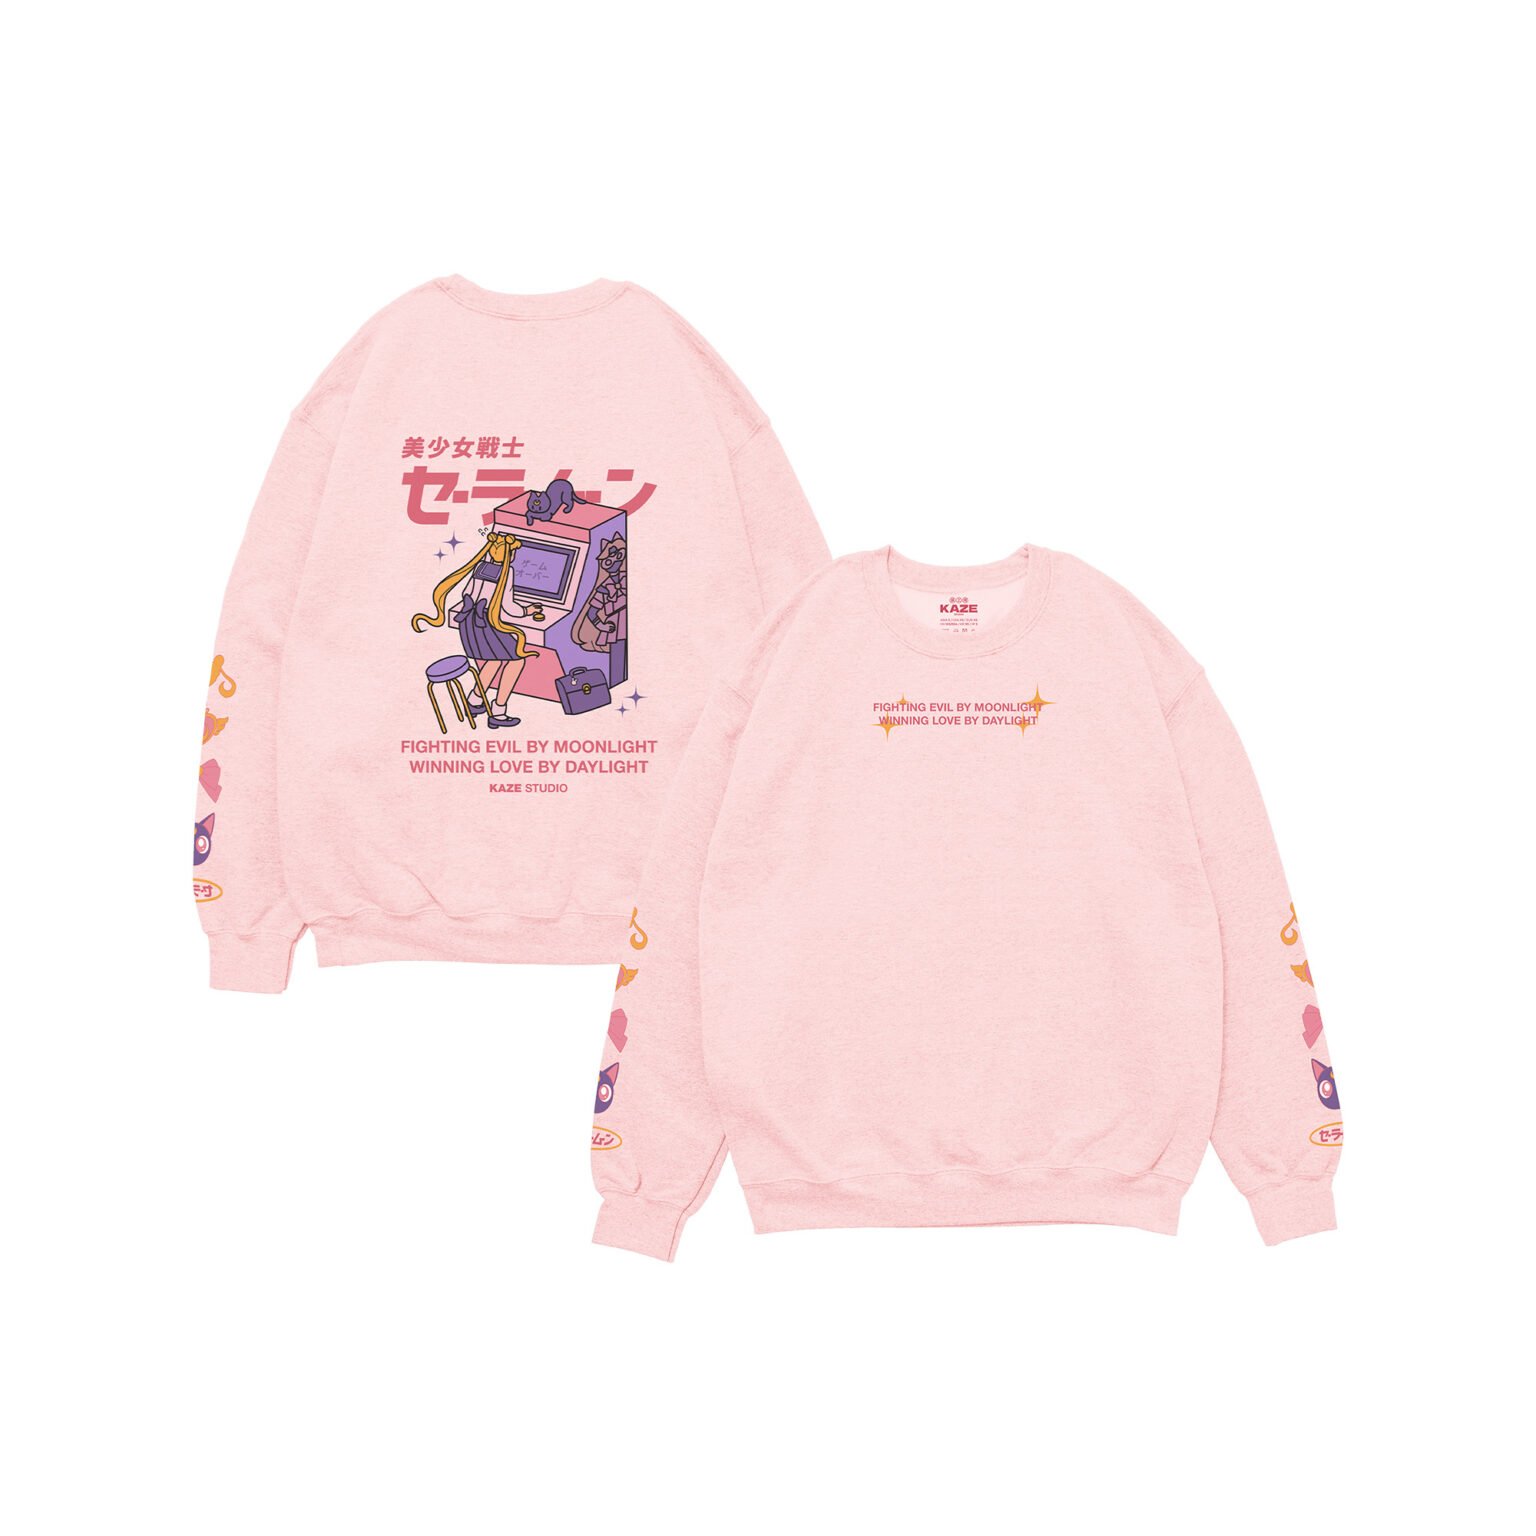 Sailor Moon Sweater  "Game Over" IDR. 490.000  IDR. 190.000 /   $49.00 $19.00